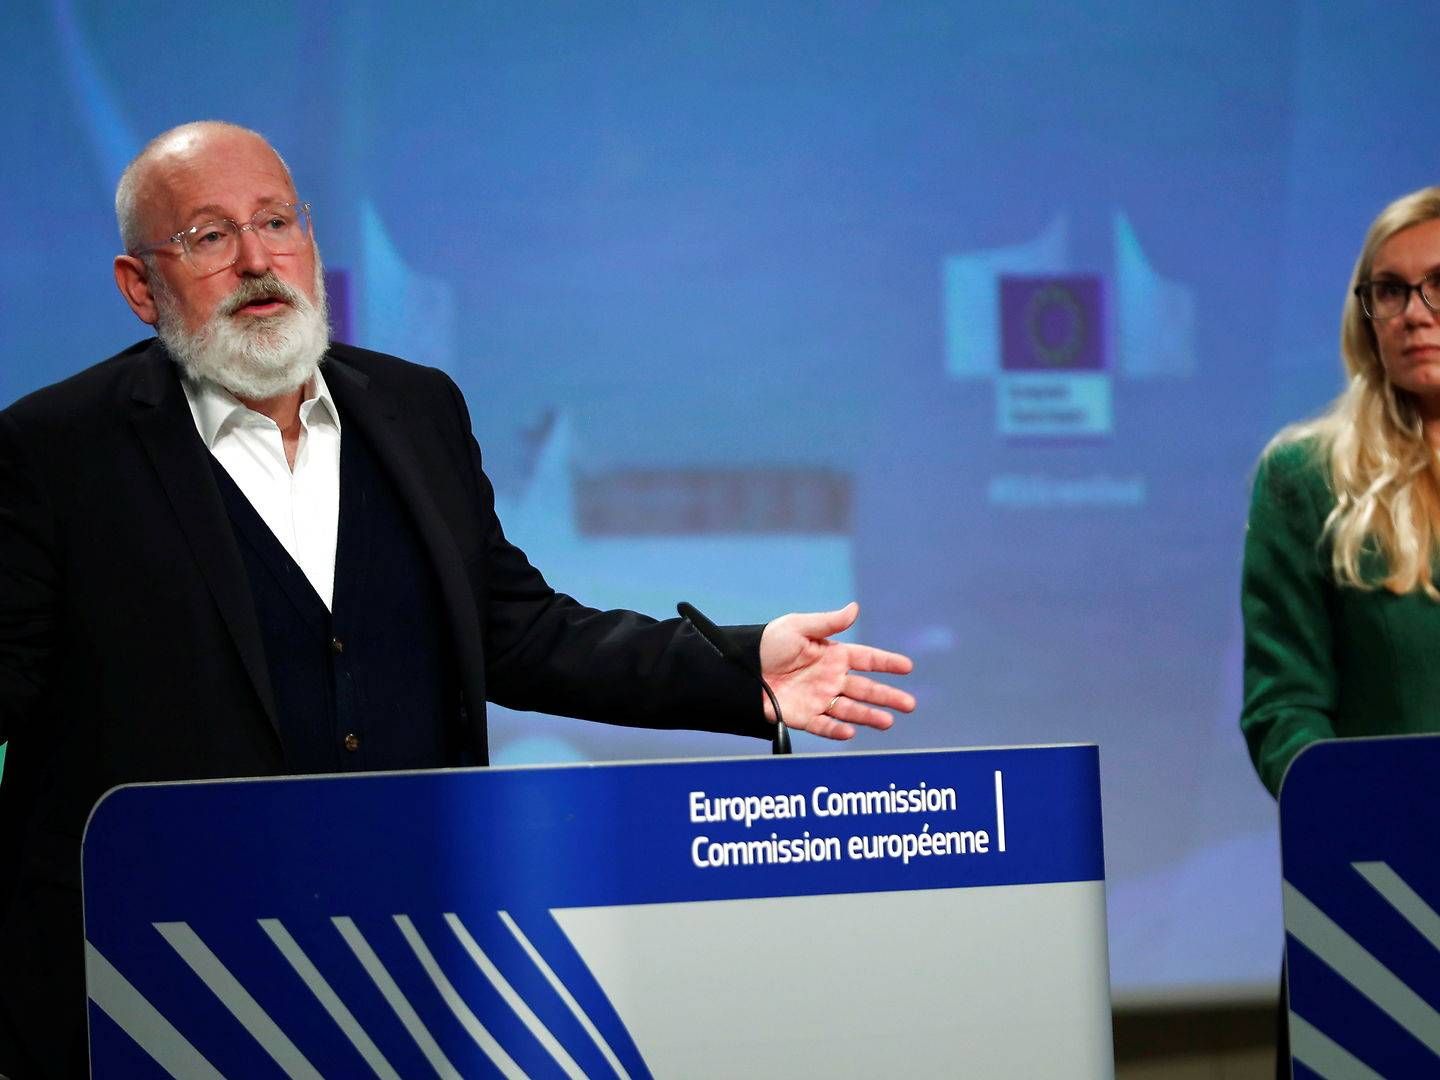 EU Commission Vice President Frans Timmermans and European Commissioner for Energy Kadri Simson presented the EU Commission's new offshore energy plan on Thursday. | Photo: Pool/Reuters/Ritzau Scanpix